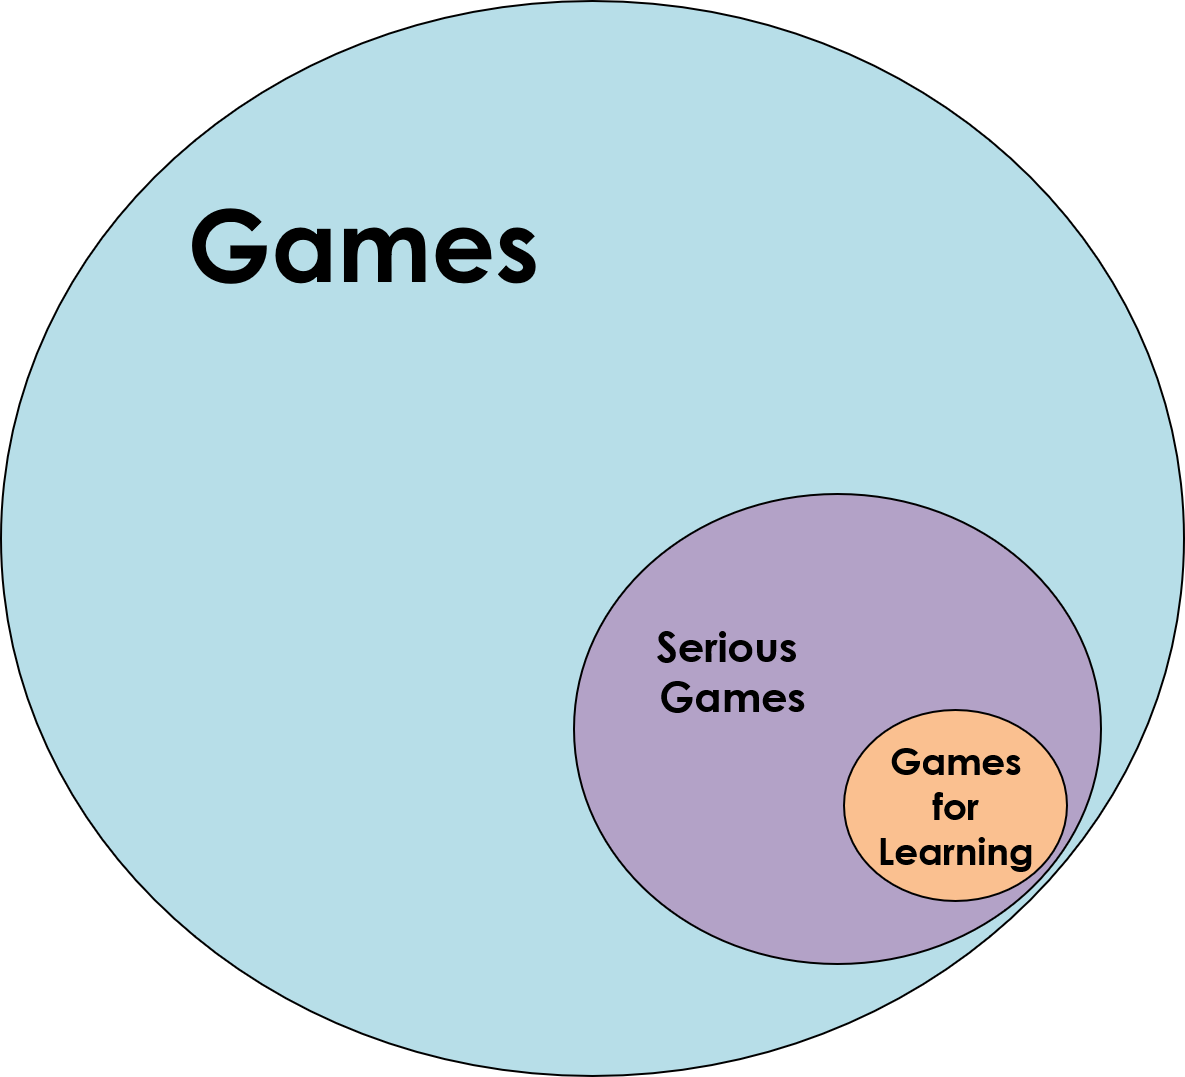 Games ⪾ Serious Games ⪾ Games for Learning